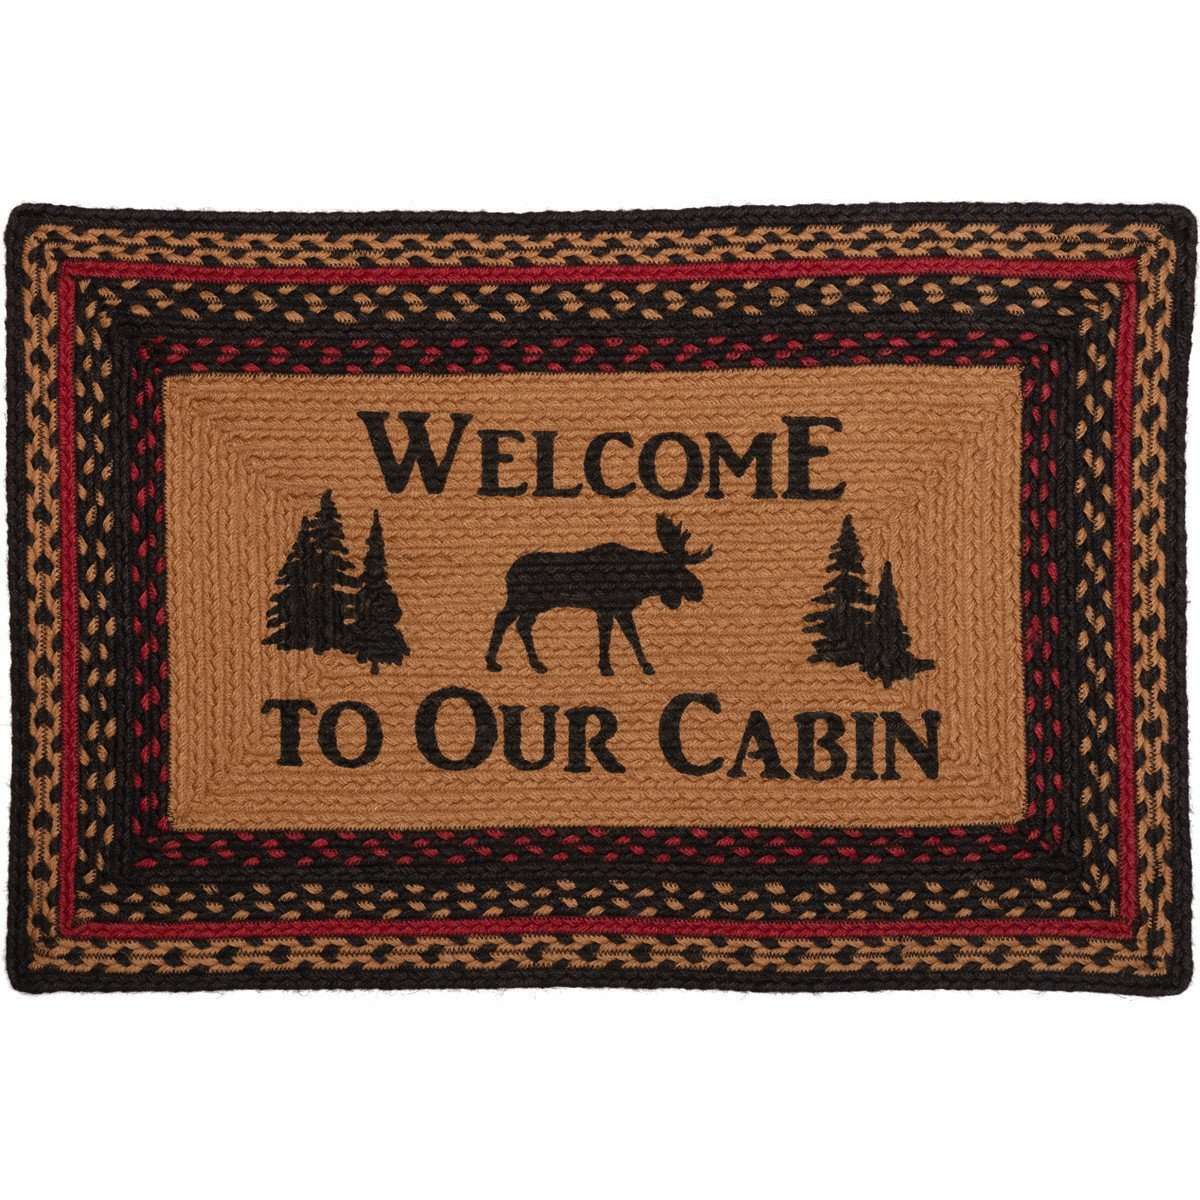 Cumberland Stenciled Moose Jute Braided Rug Oval/Rect Welcome to the Cabin VHC Brands rugs VHC Brands 20x30 inch Rect 